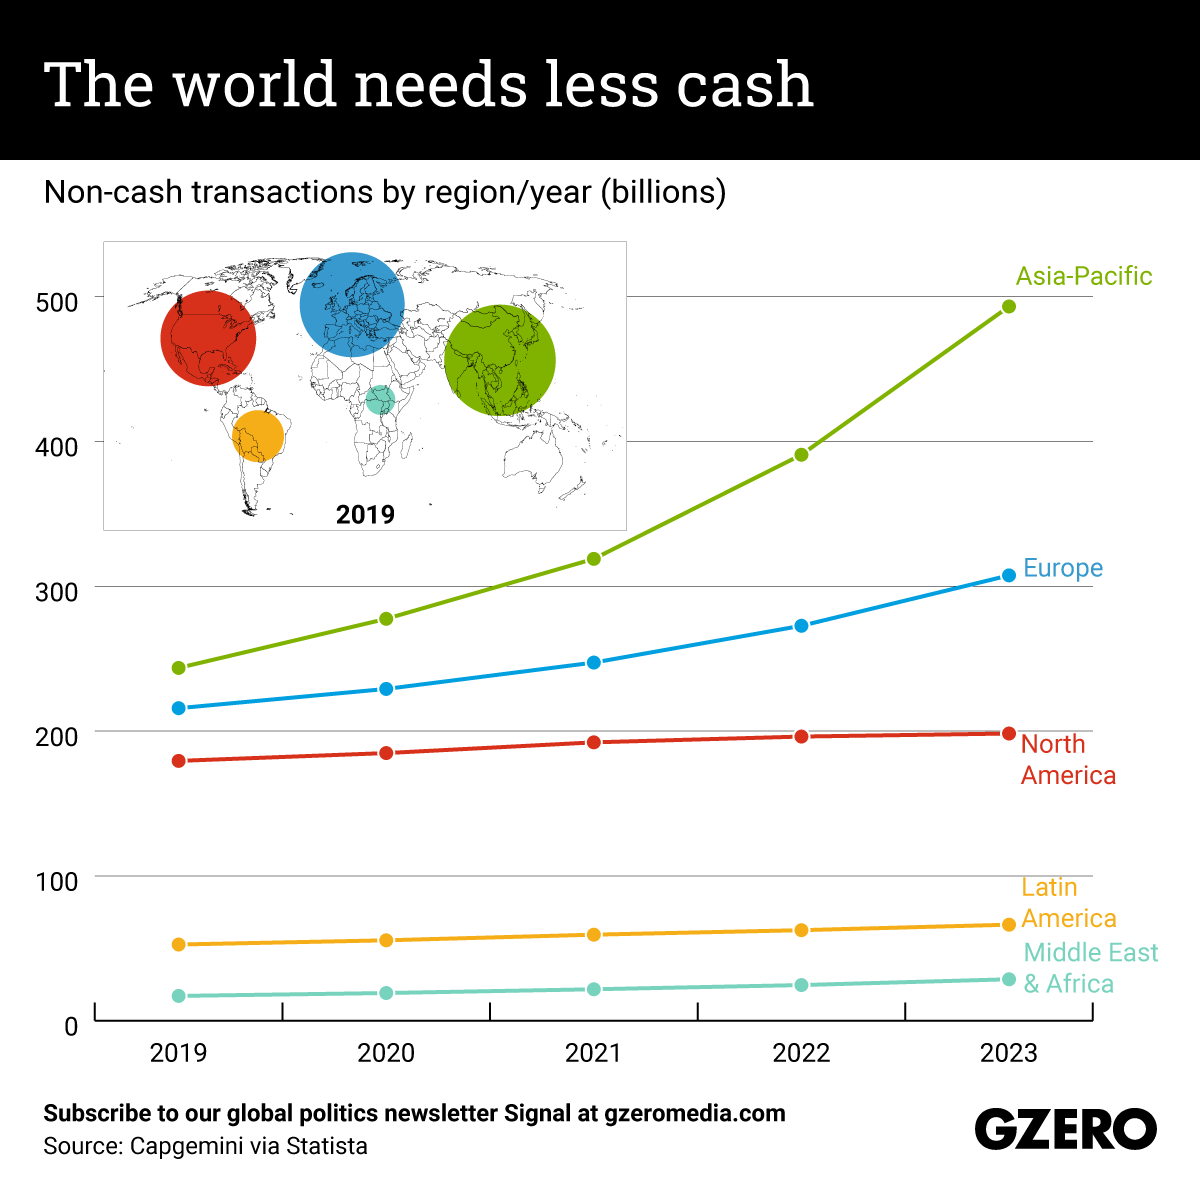 Line chart comparing non-cash transactions volume in 5 global regions from 2019 to 2023.